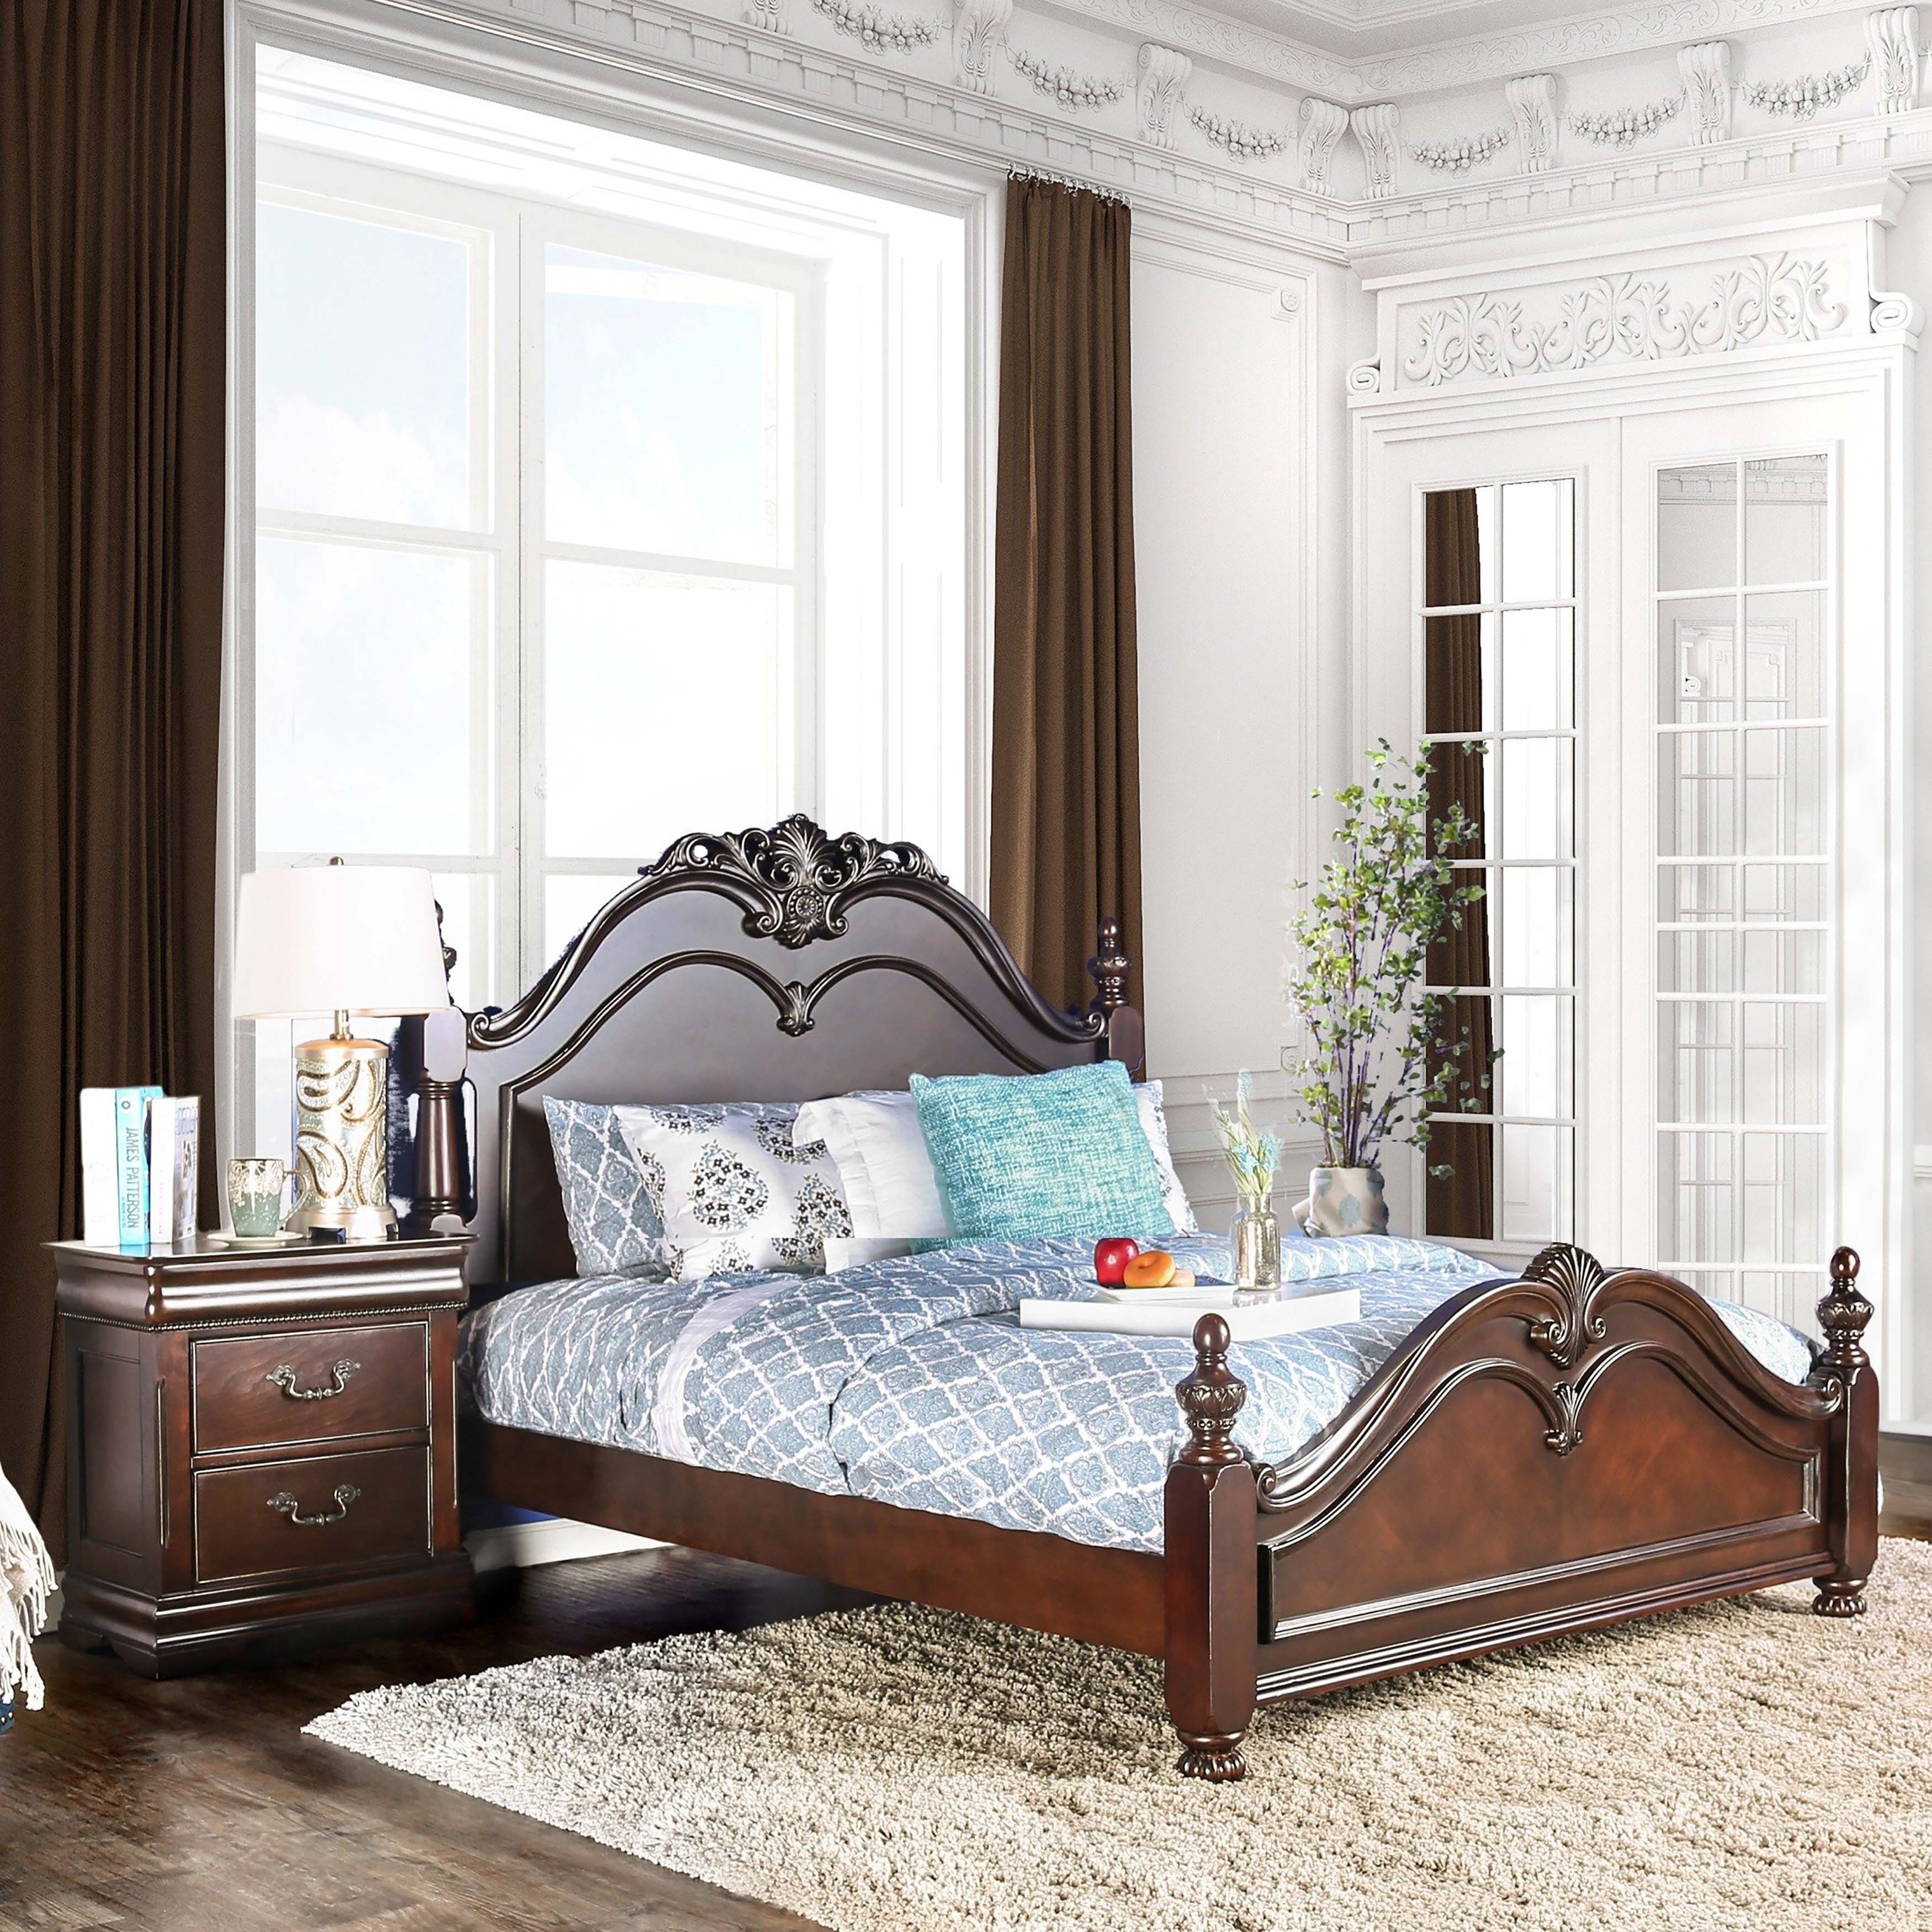 Brown Cherry Finish Bedroom Sets - Bed Bath & Beyond